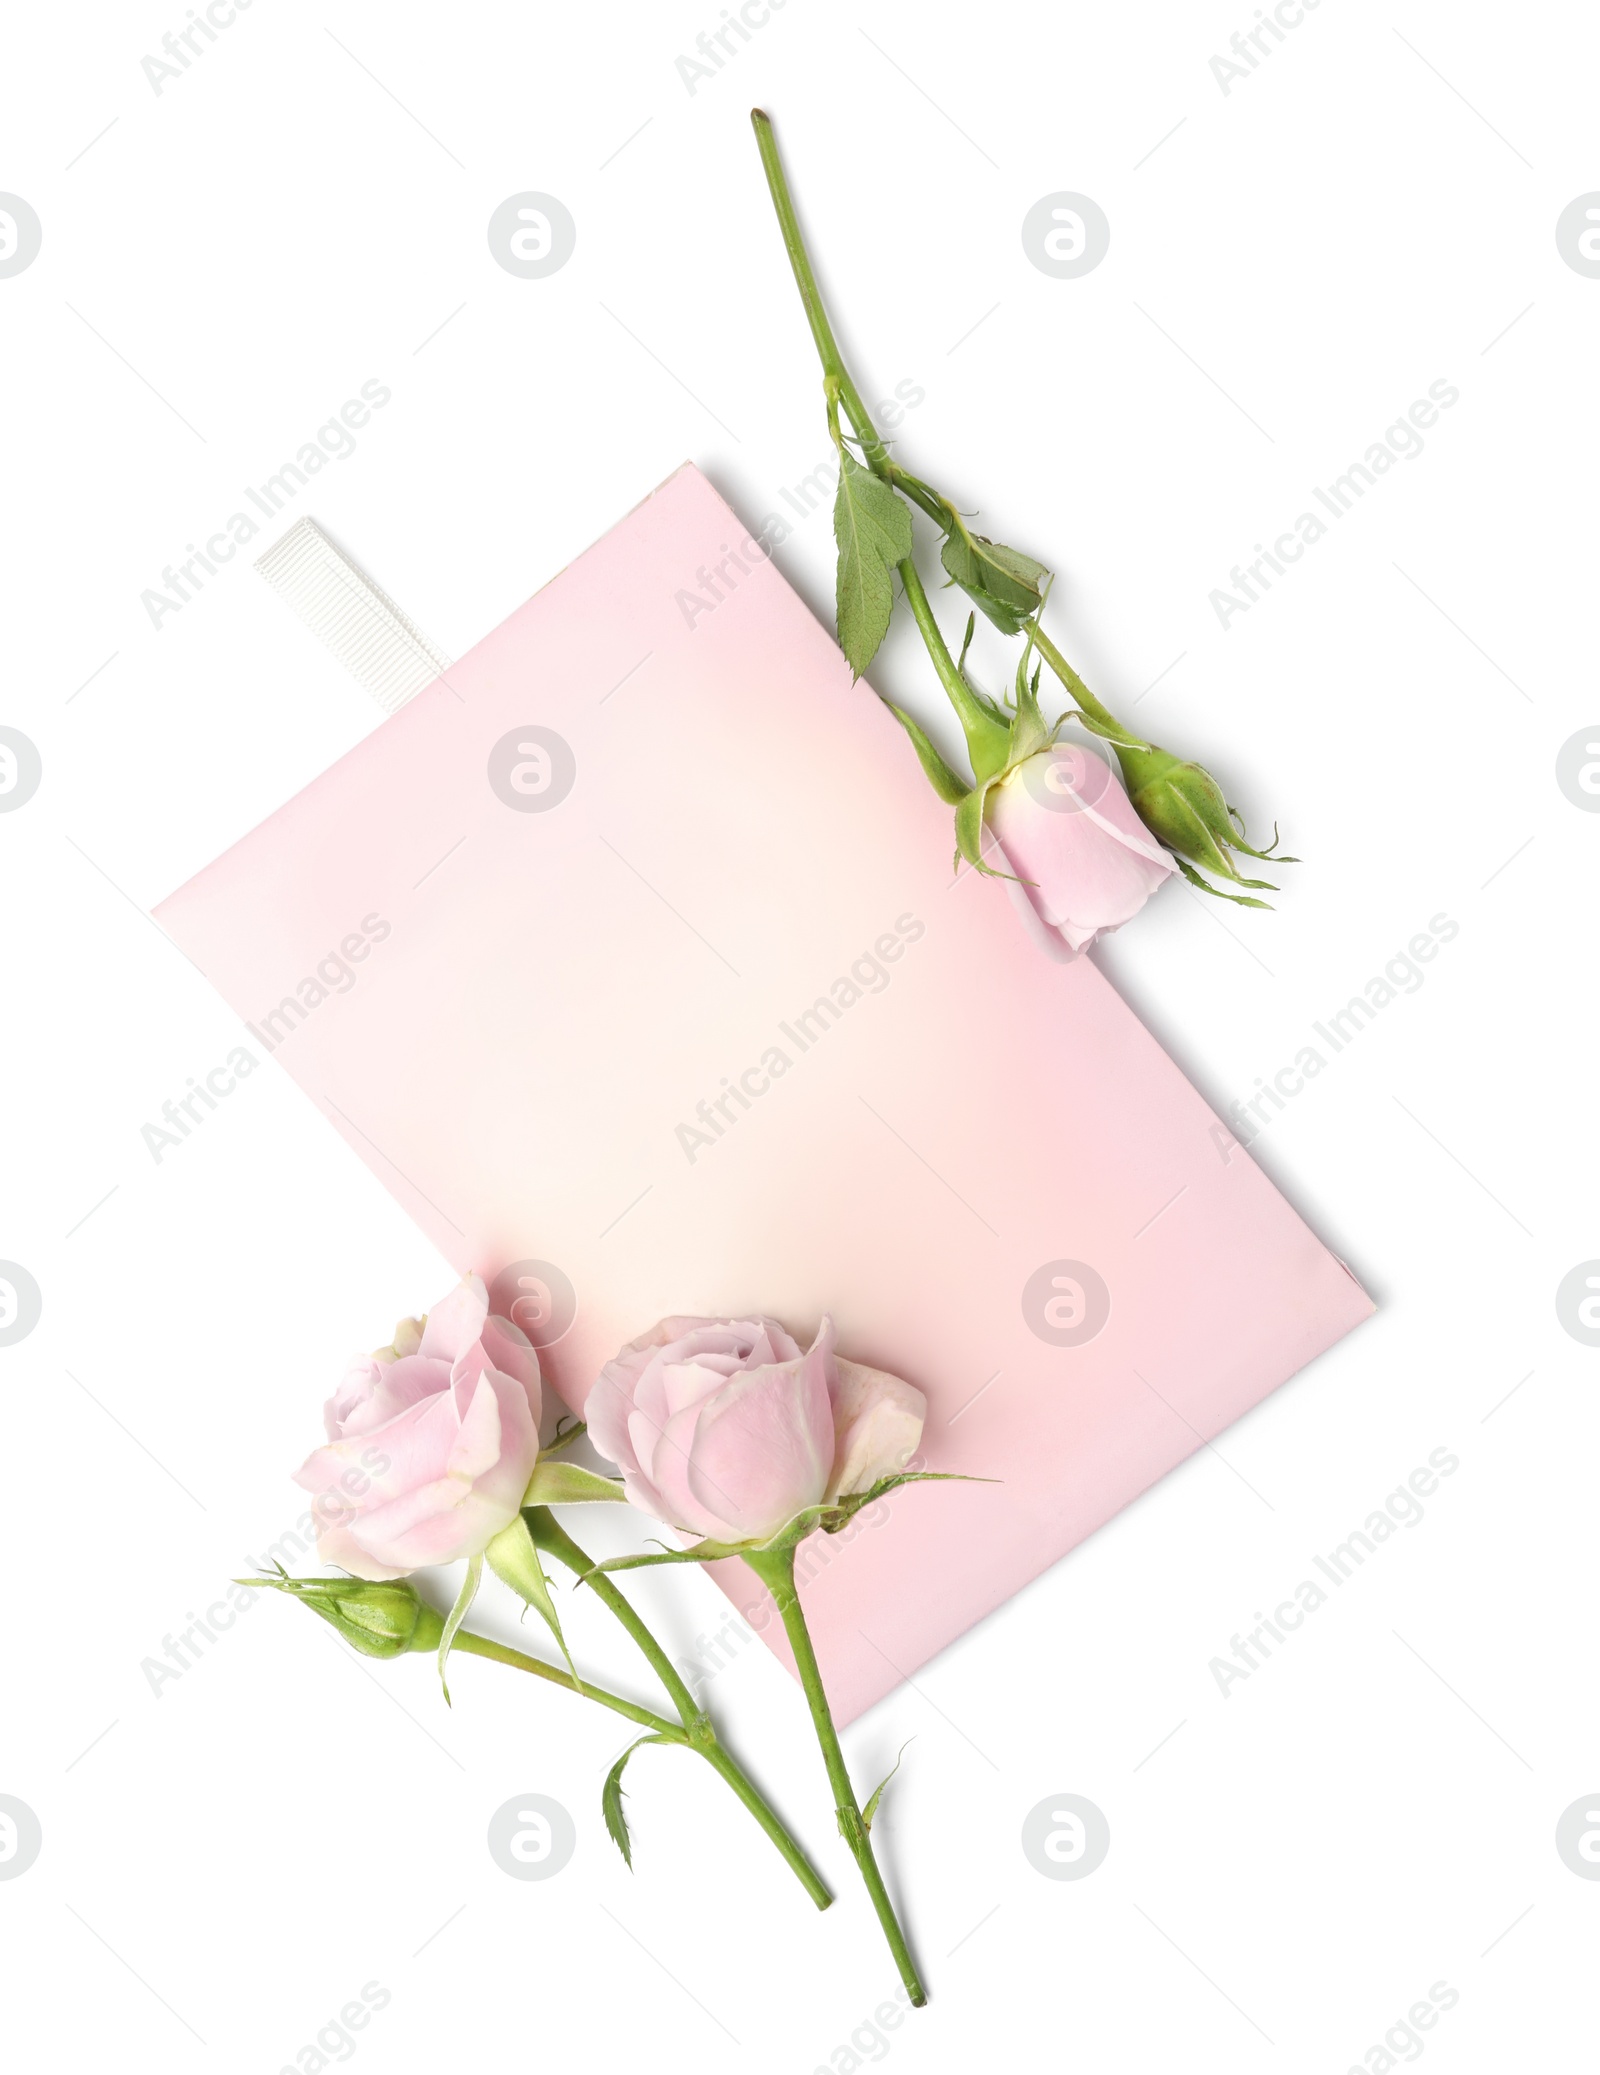 Photo of Scented sachet and pink roses on white background, top view